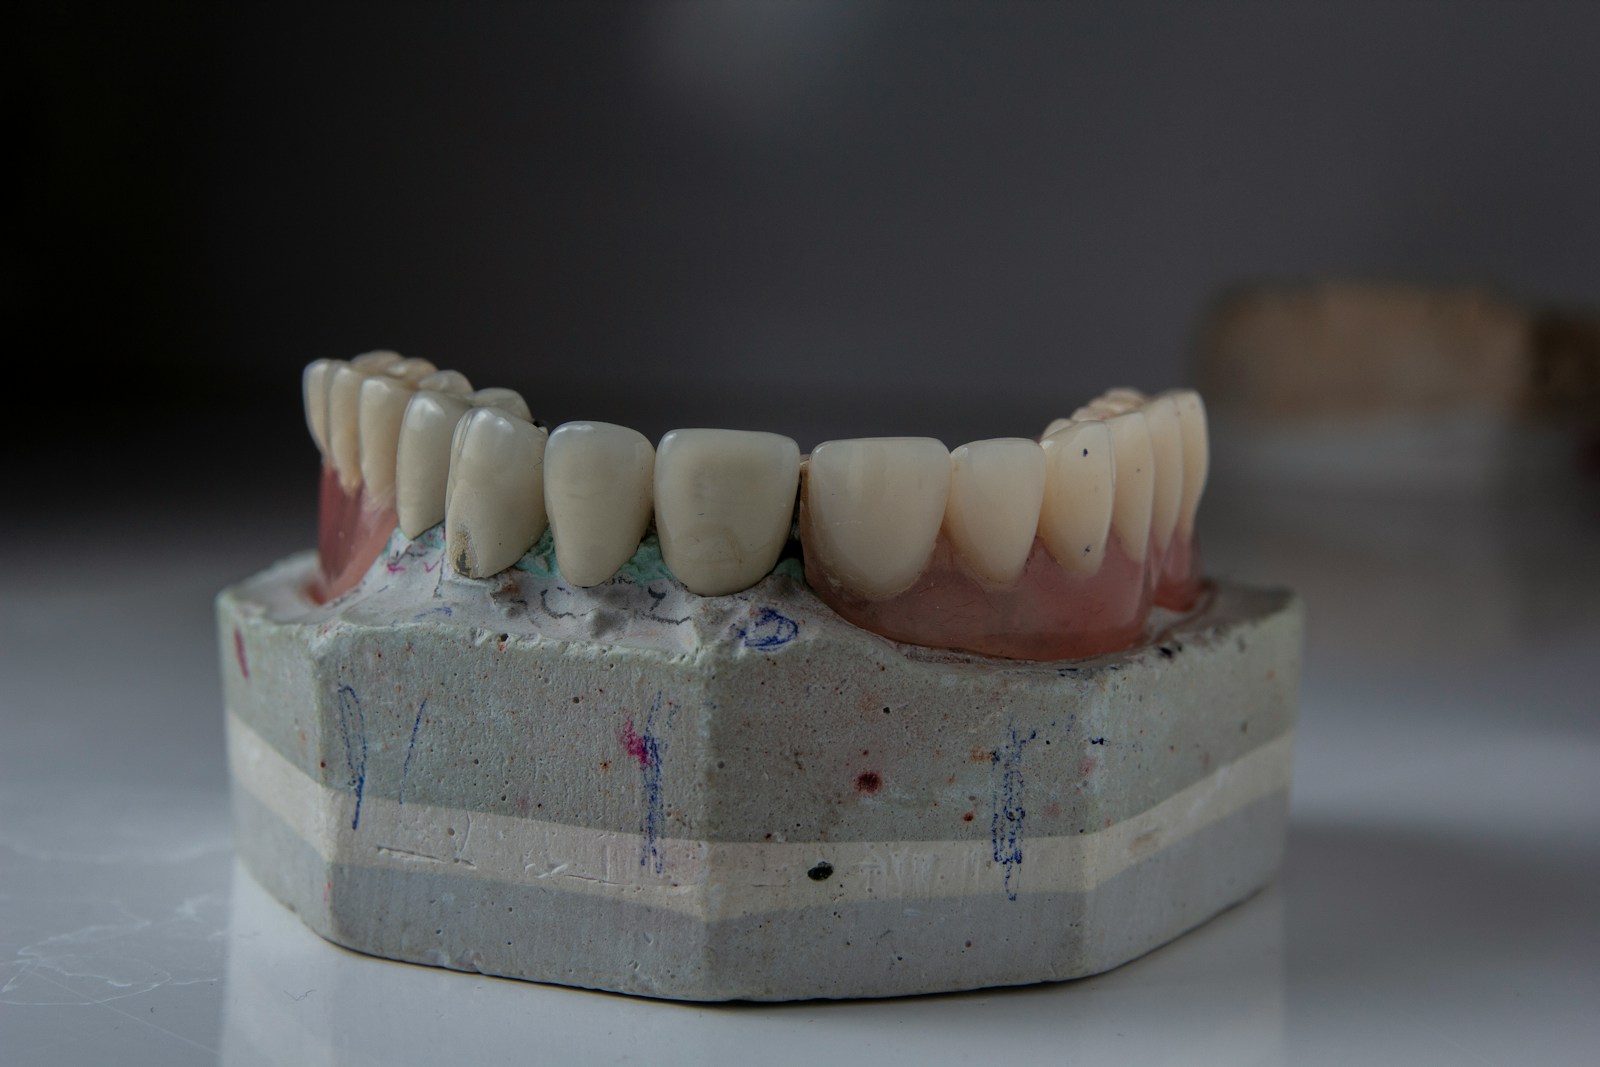 a close up of a tooth model on a table